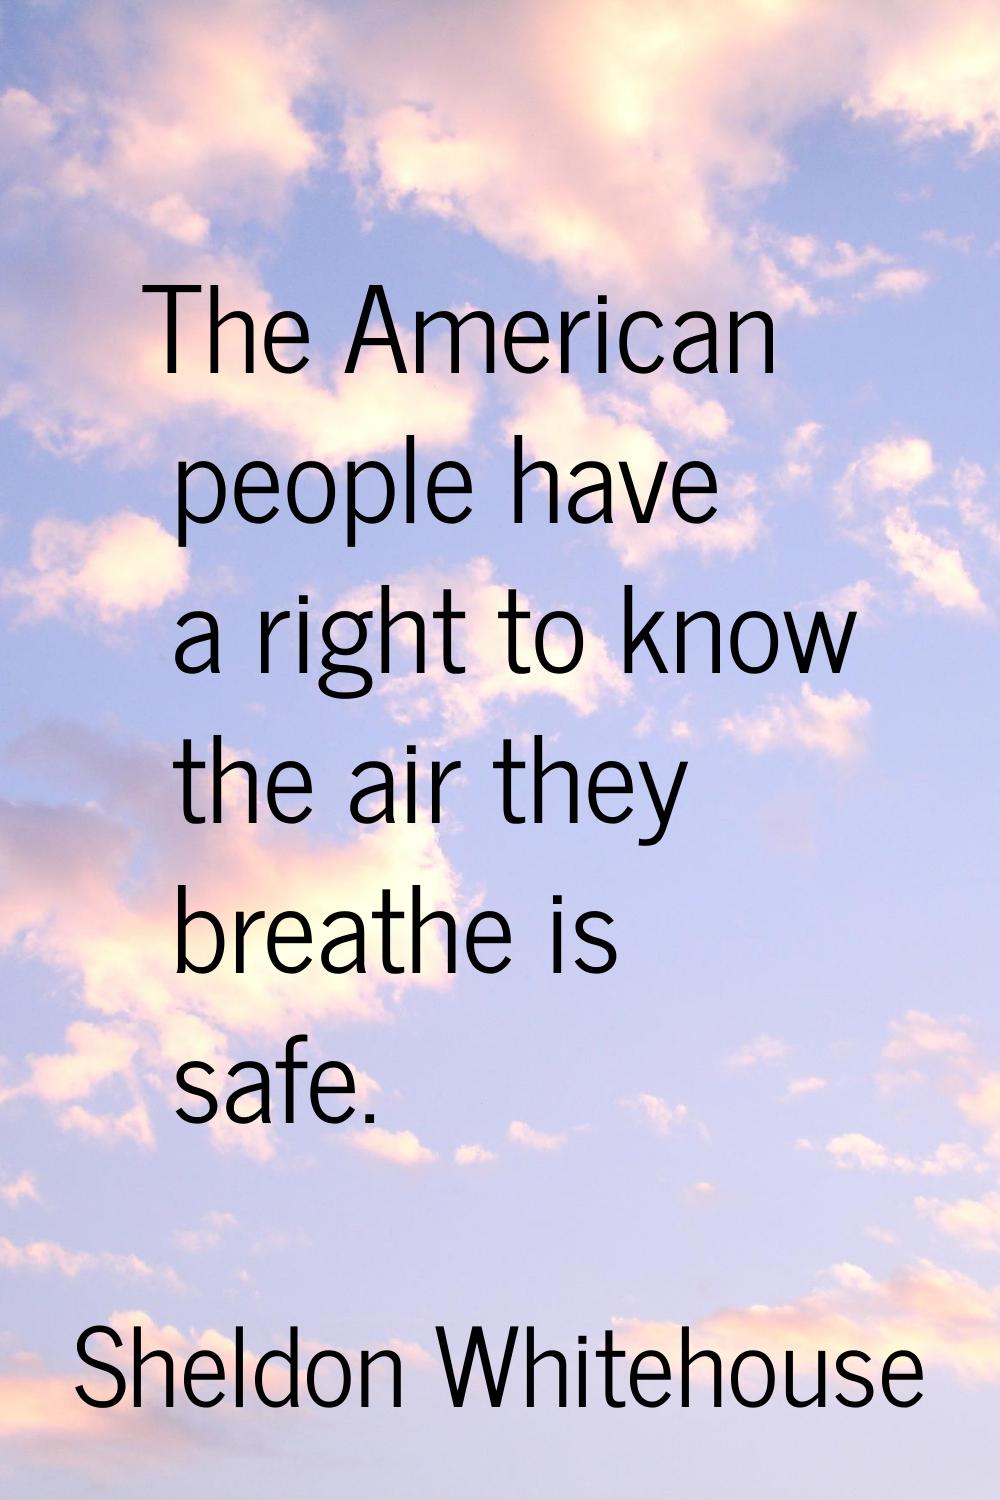 The American people have a right to know the air they breathe is safe.